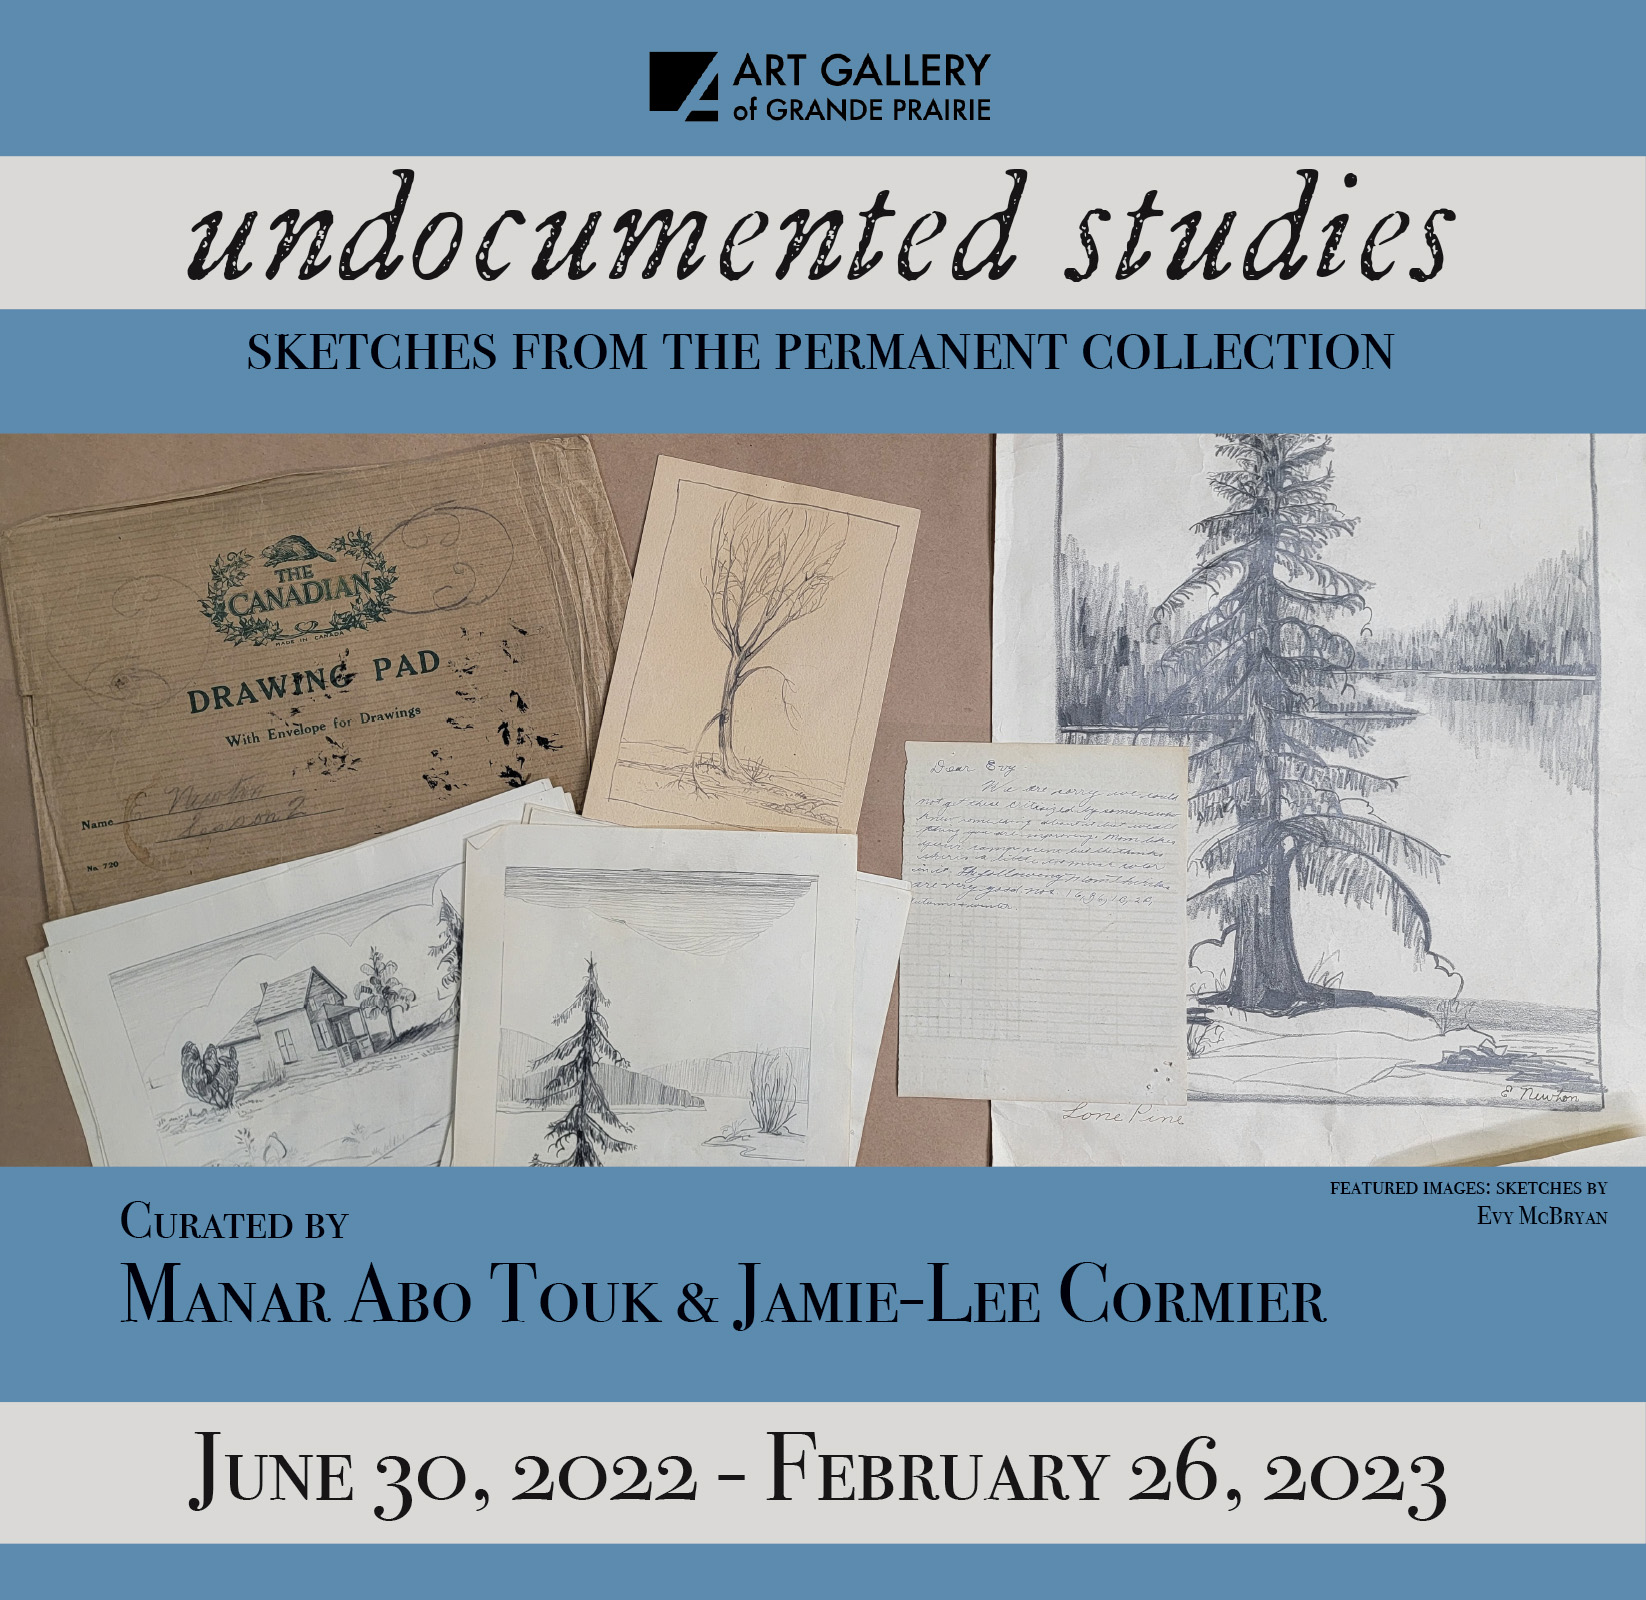 Undocumented Studies Evelyn McBryan, Sketches from The Permanent Collection